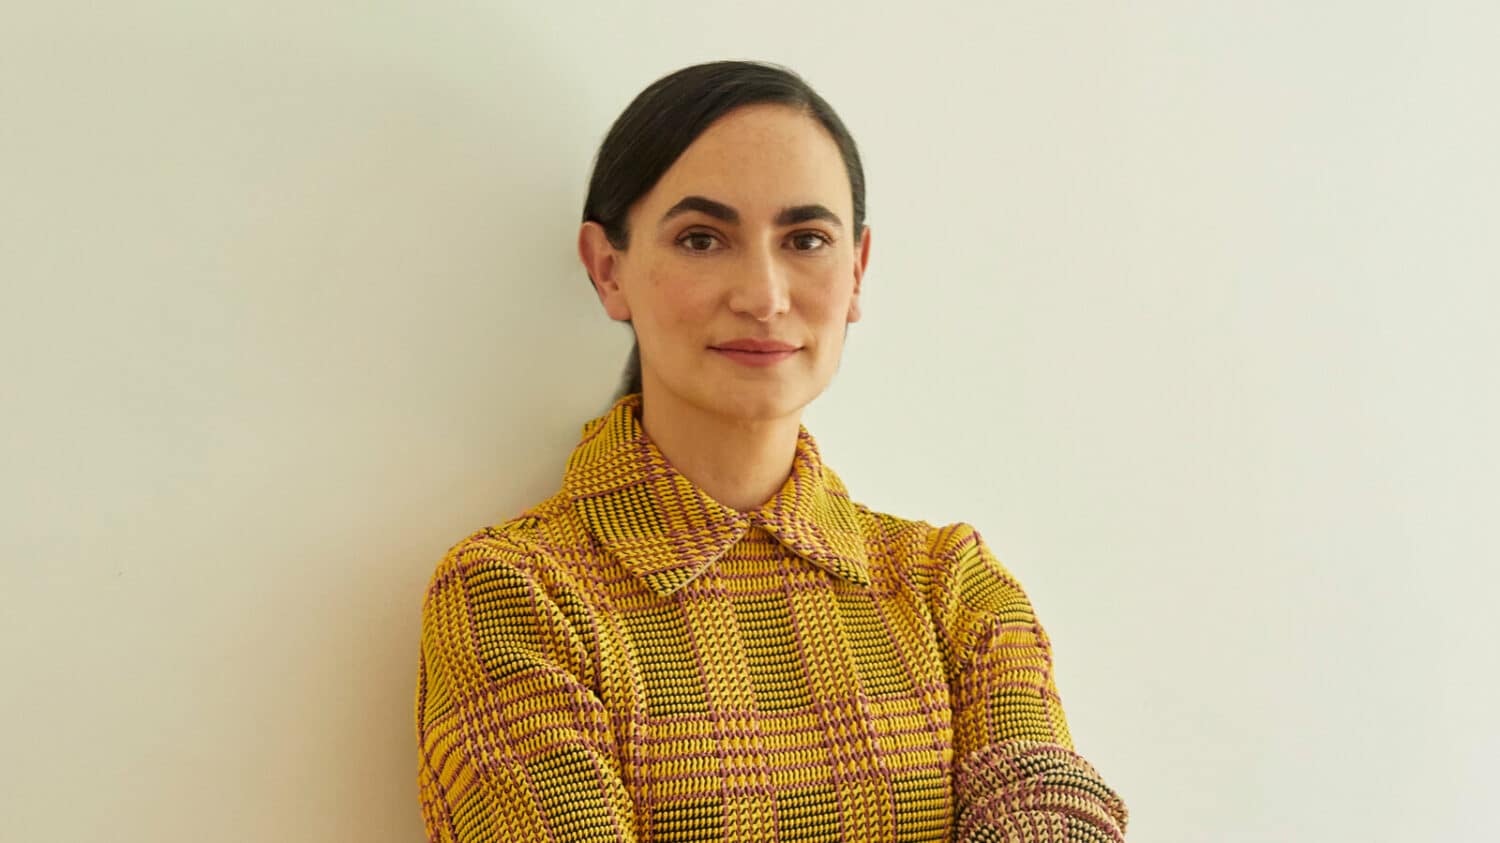 FRIDA ESCOBEDO WILL BE THE FIRST WOMAN OF ARCHITECTS TO DESIGN A WING IN MET -